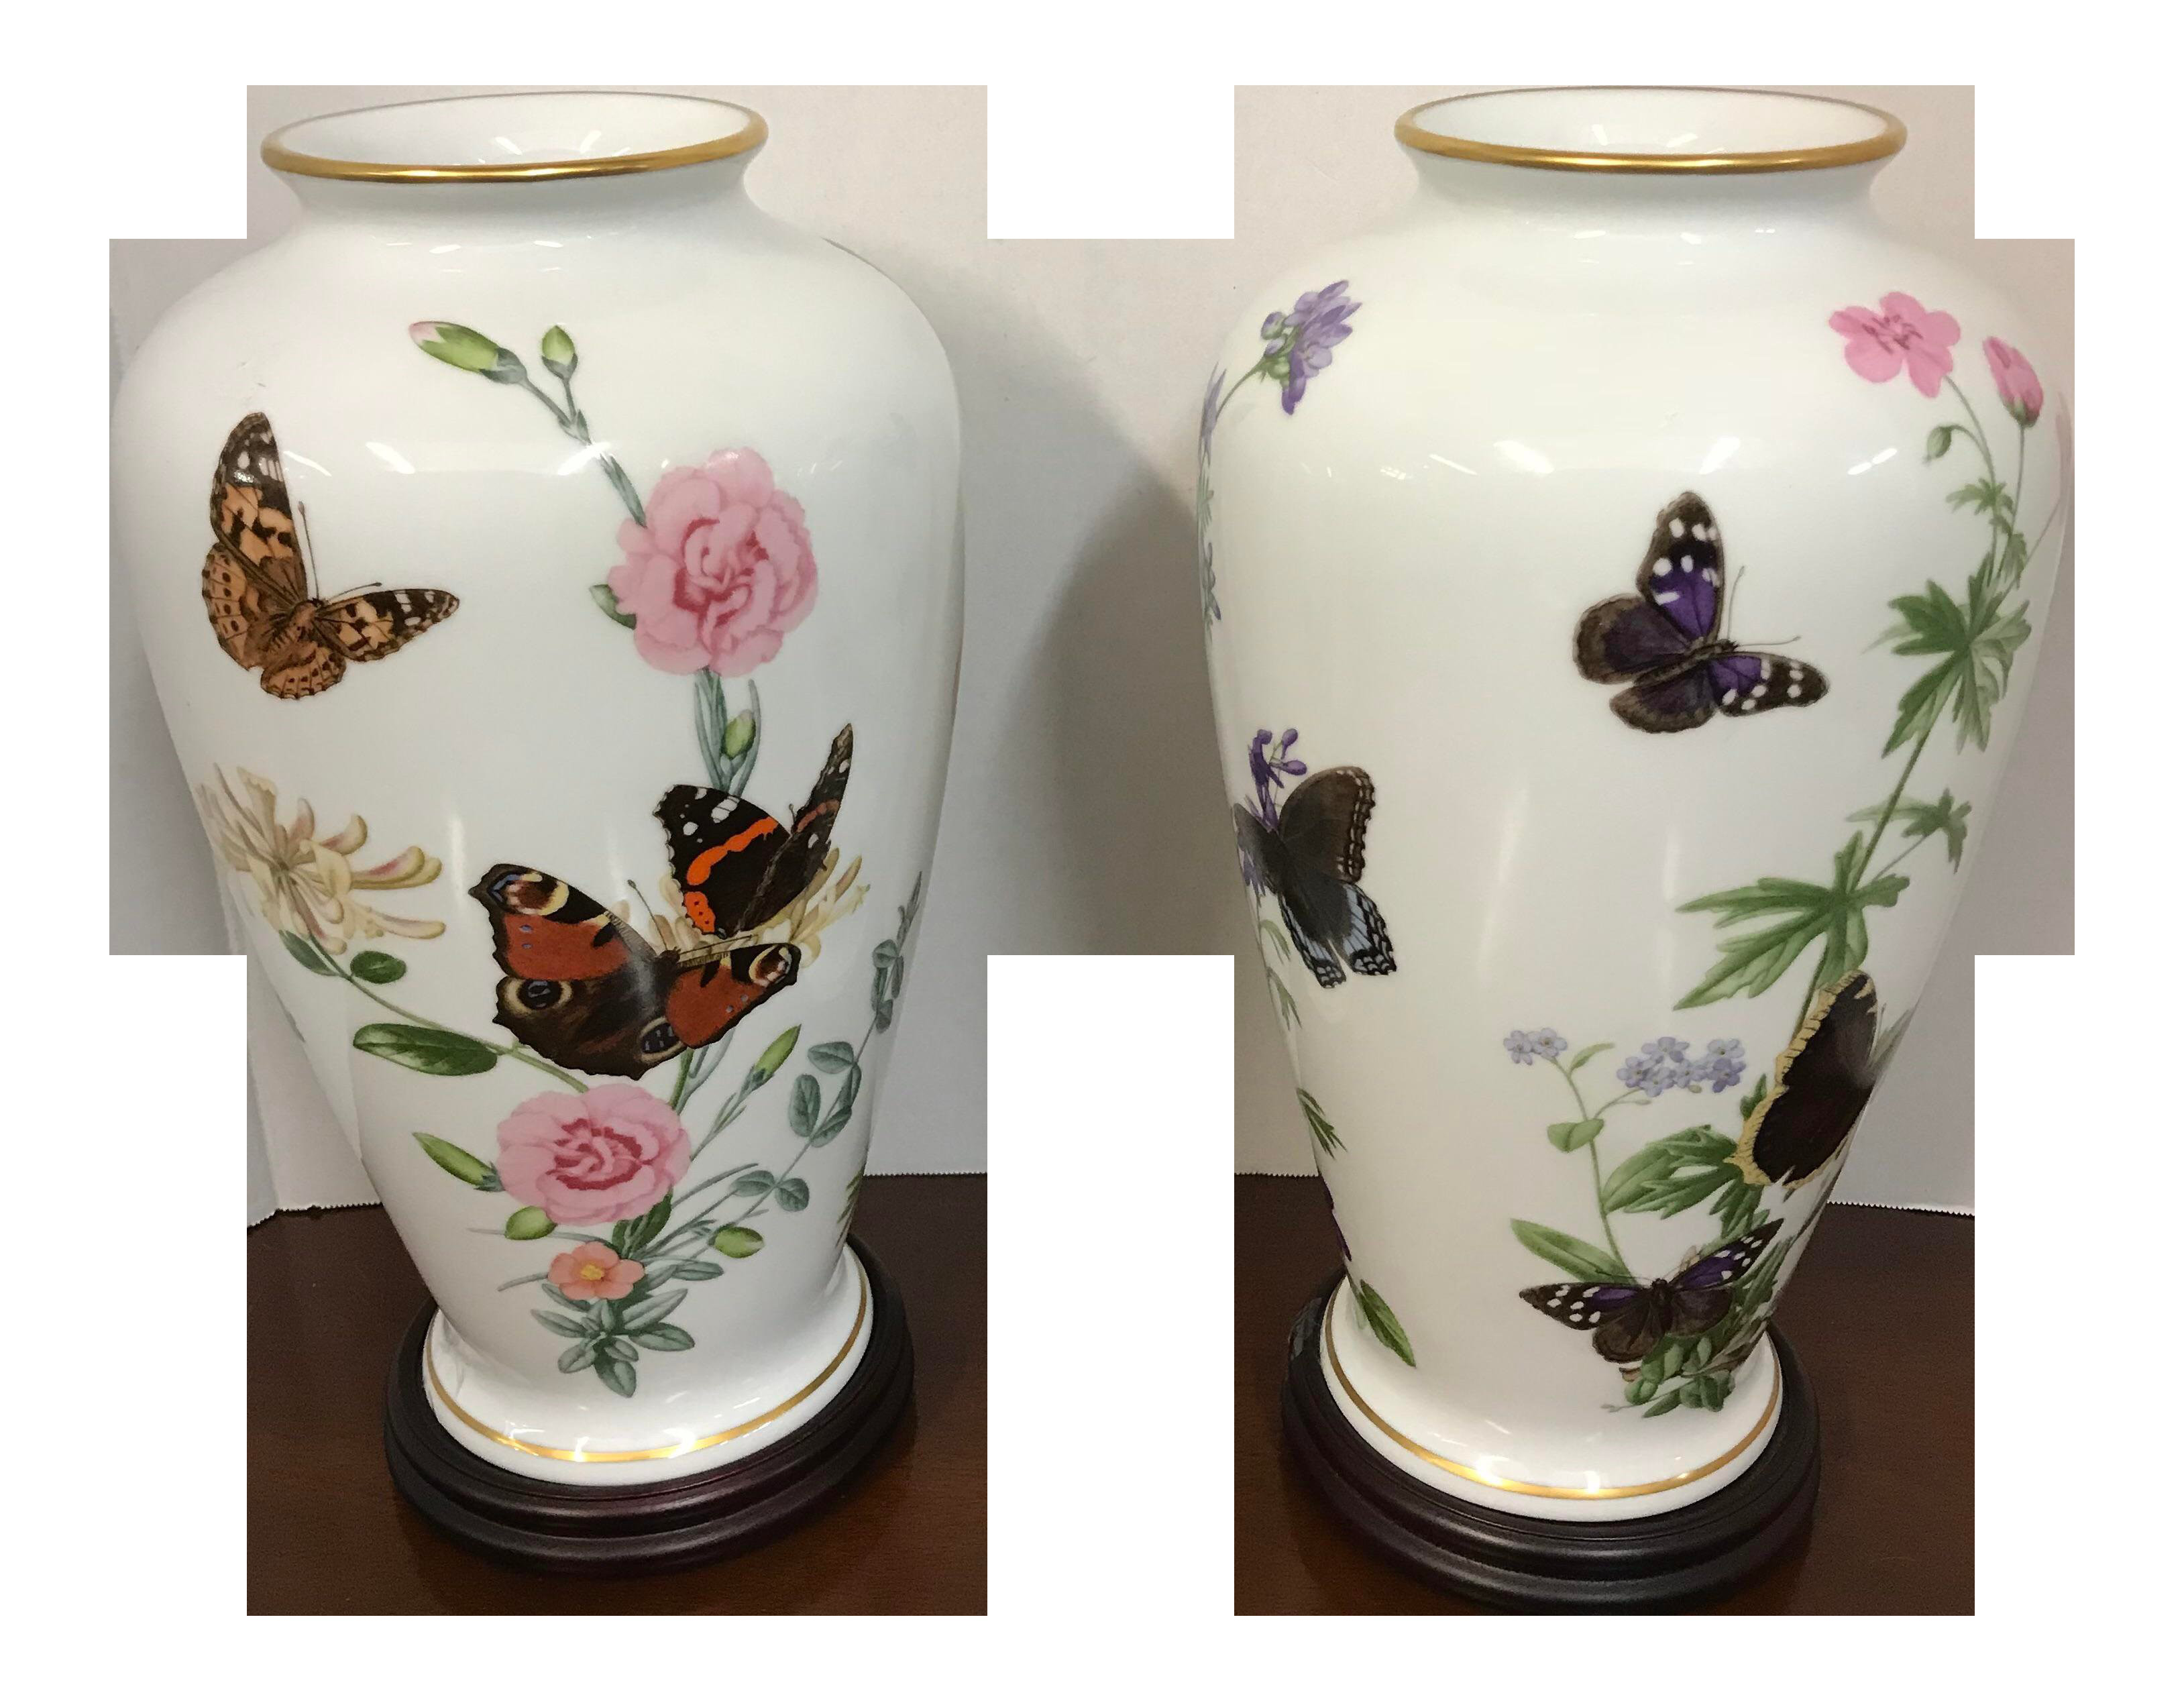 30 Fashionable Qianlong Vase Value 2024 free download qianlong vase value of little chinese ginger jars a pair late 1800s for 1980s franklin porcelain john wilkinson country garden meadowland butterfly vases a pair